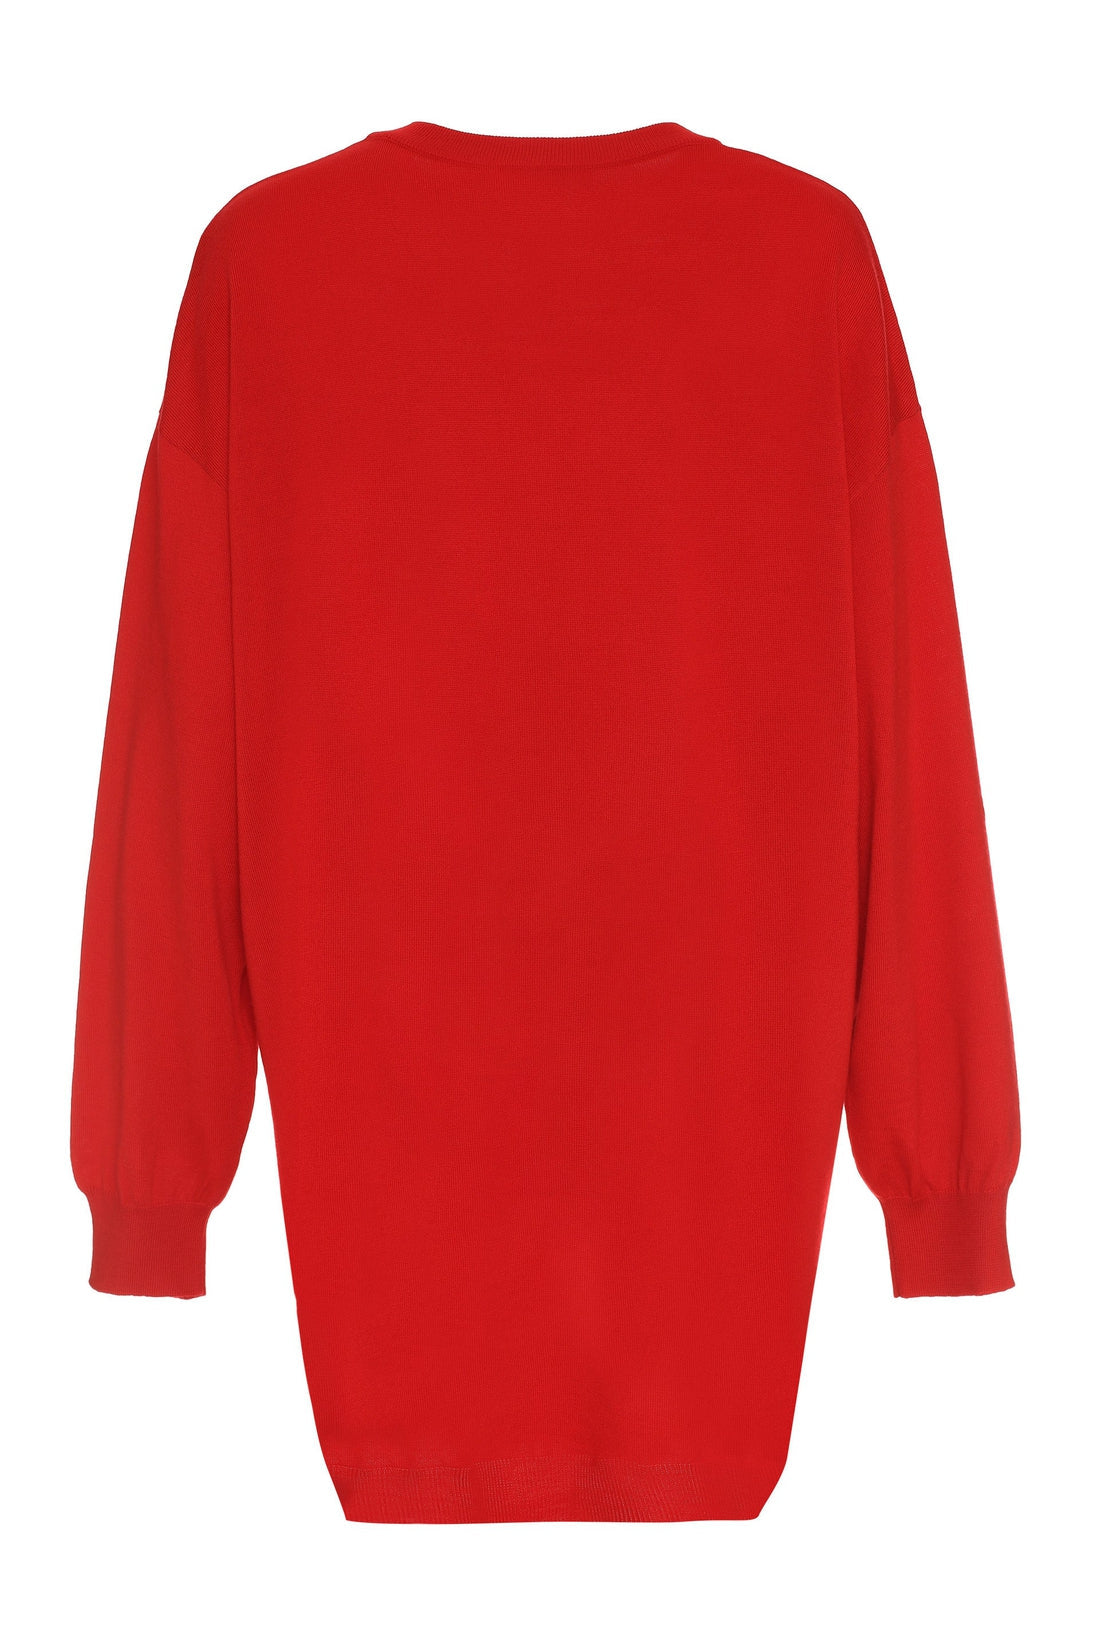 Moschino-OUTLET-SALE-Intarsia knit-dress-ARCHIVIST